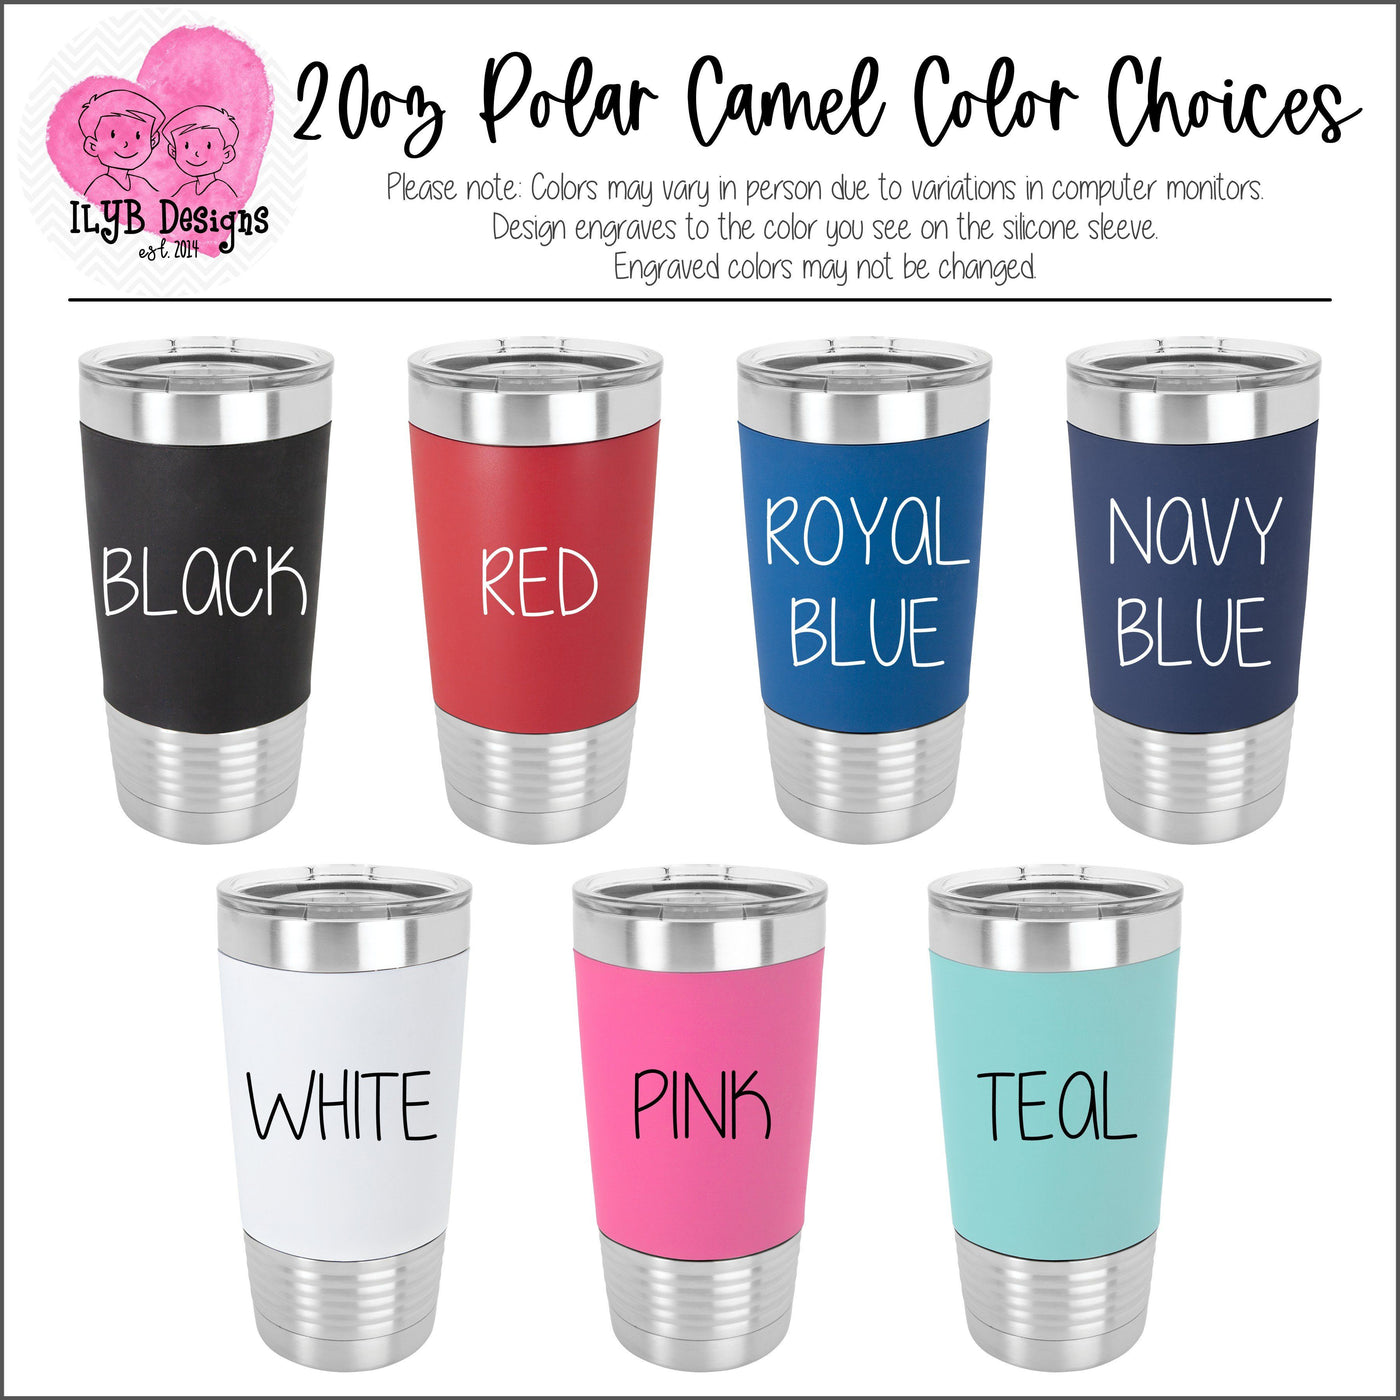 20 oz Polar Camel stainless steel tumblers with silicone sleeves. Colors include black, red, royal blue, navy blue, white, pink, and teal. 